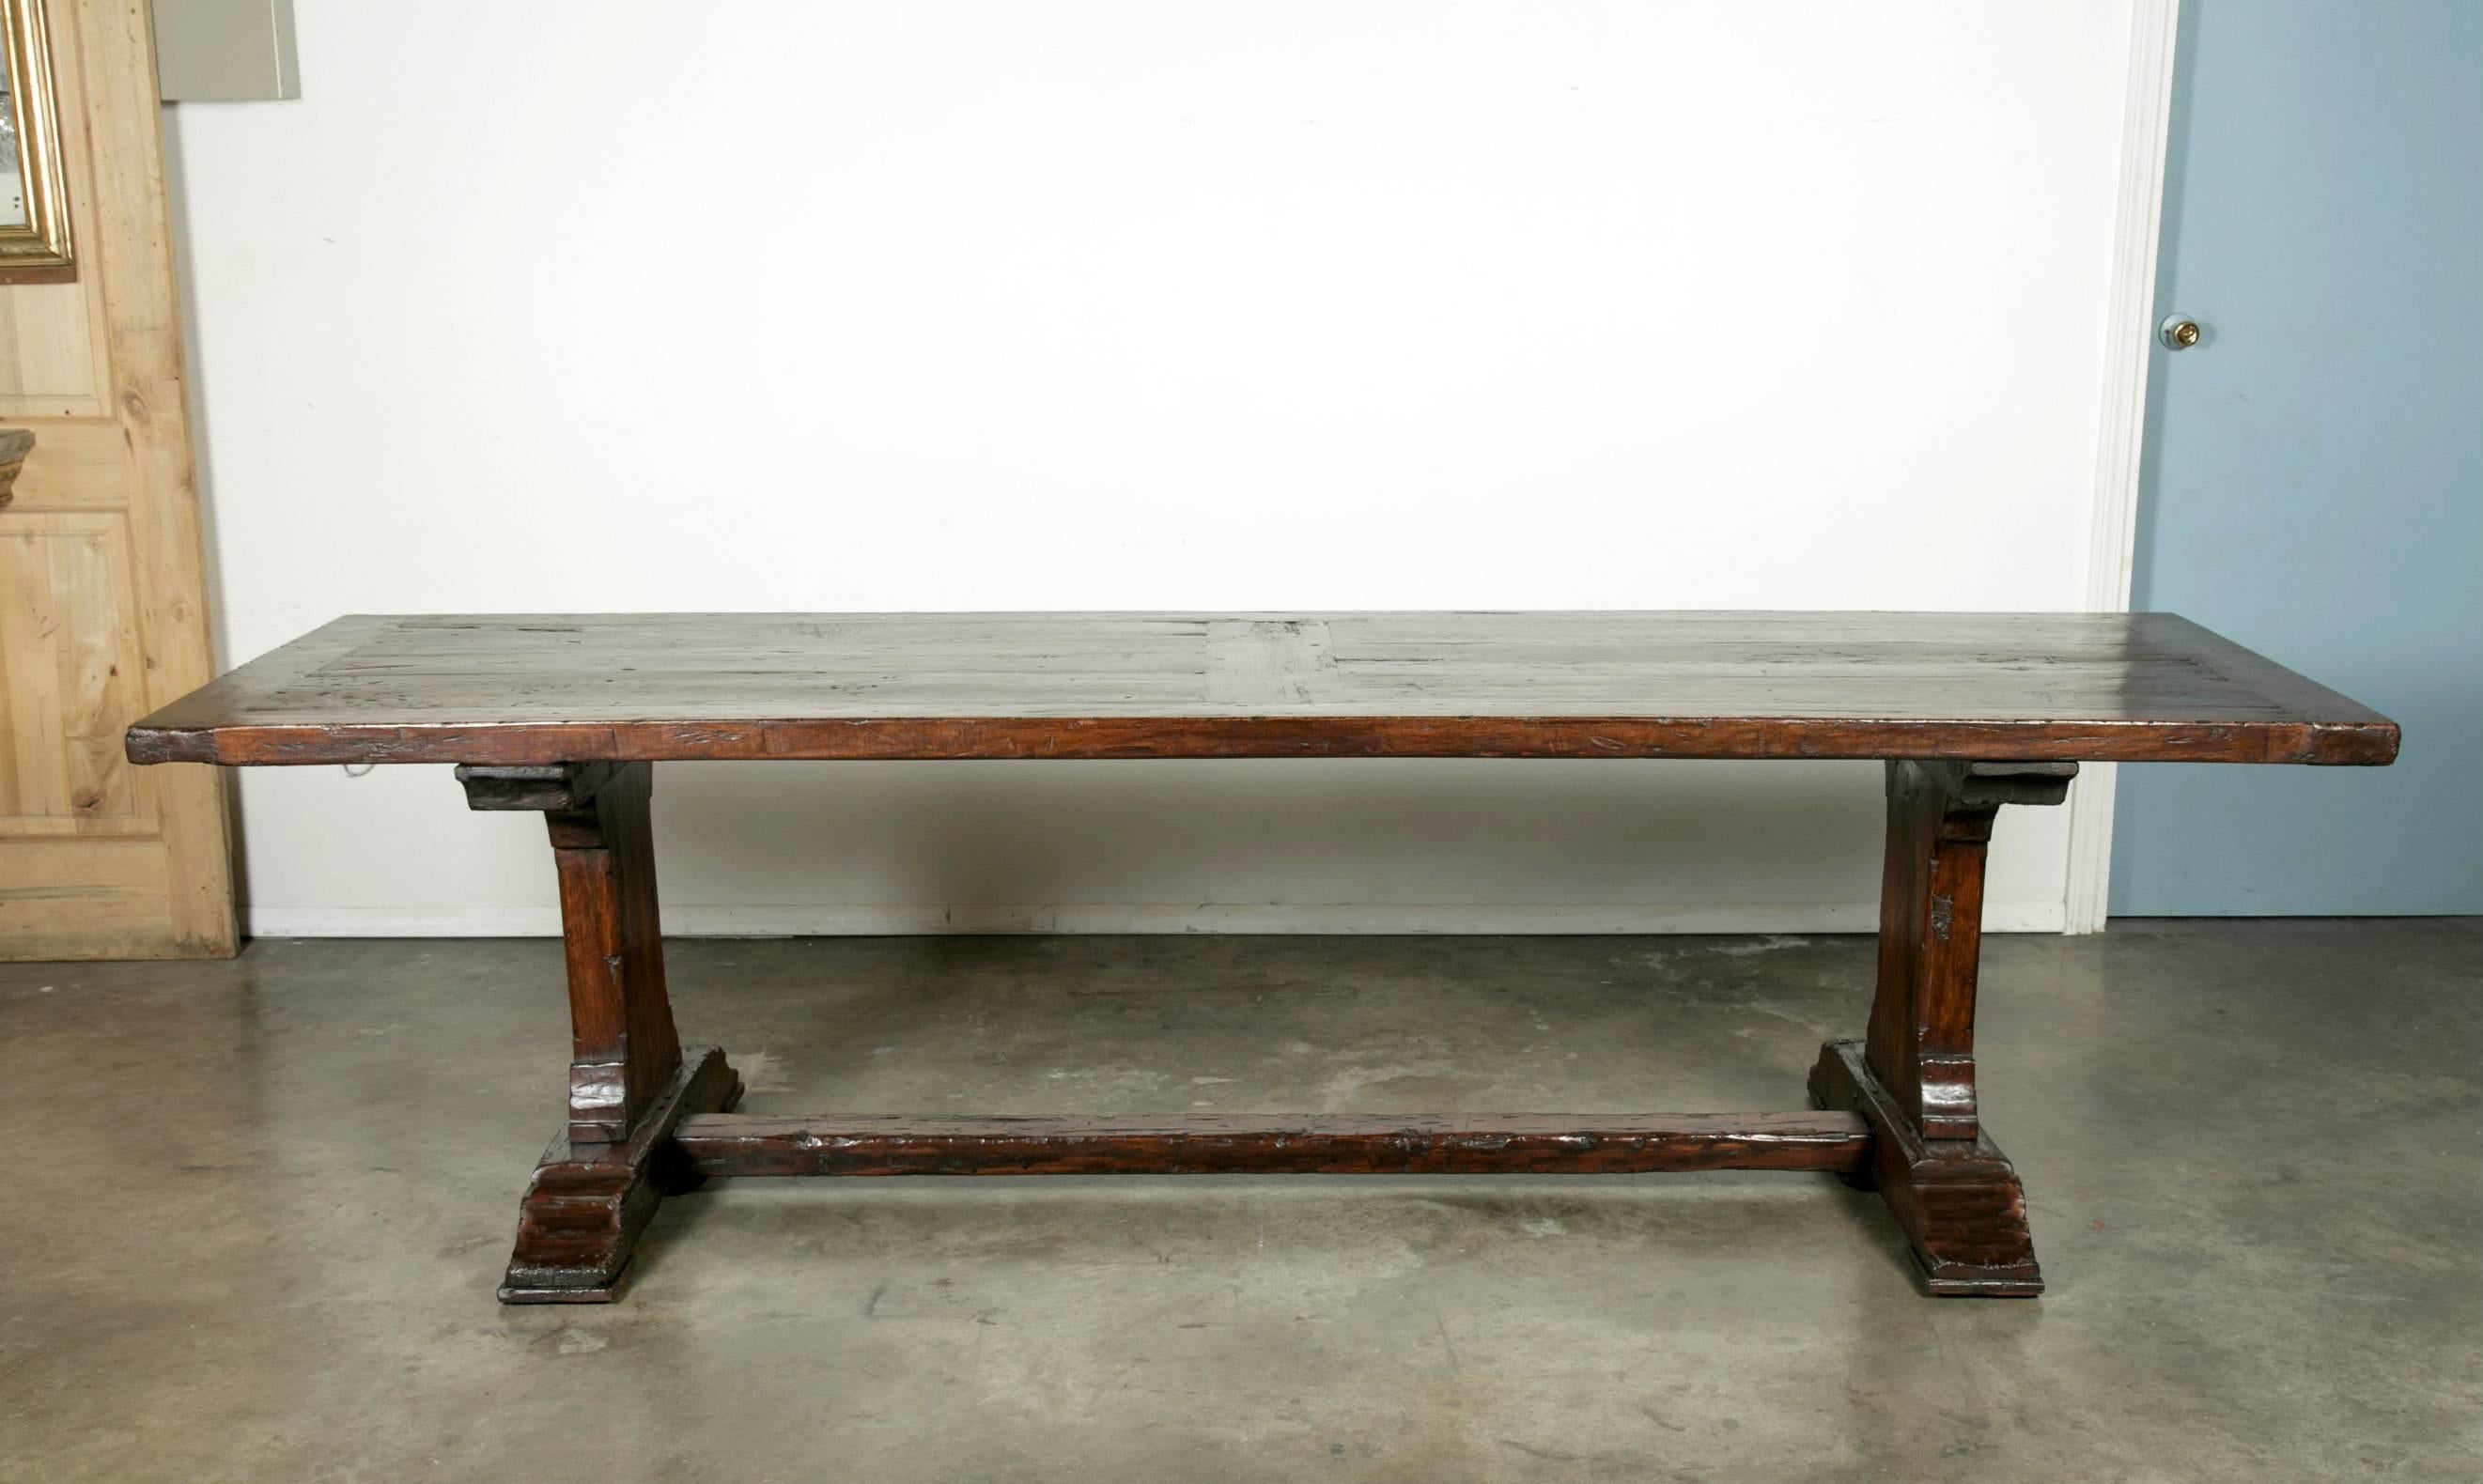 Antique trestle table handcrafted of solid walnut in the Lyon region during the 1850s, with room to seat four on each side and one on each end. The 2.25 inch thick rectangular inset board top is framed in chestnut and rests on trestle legs connected